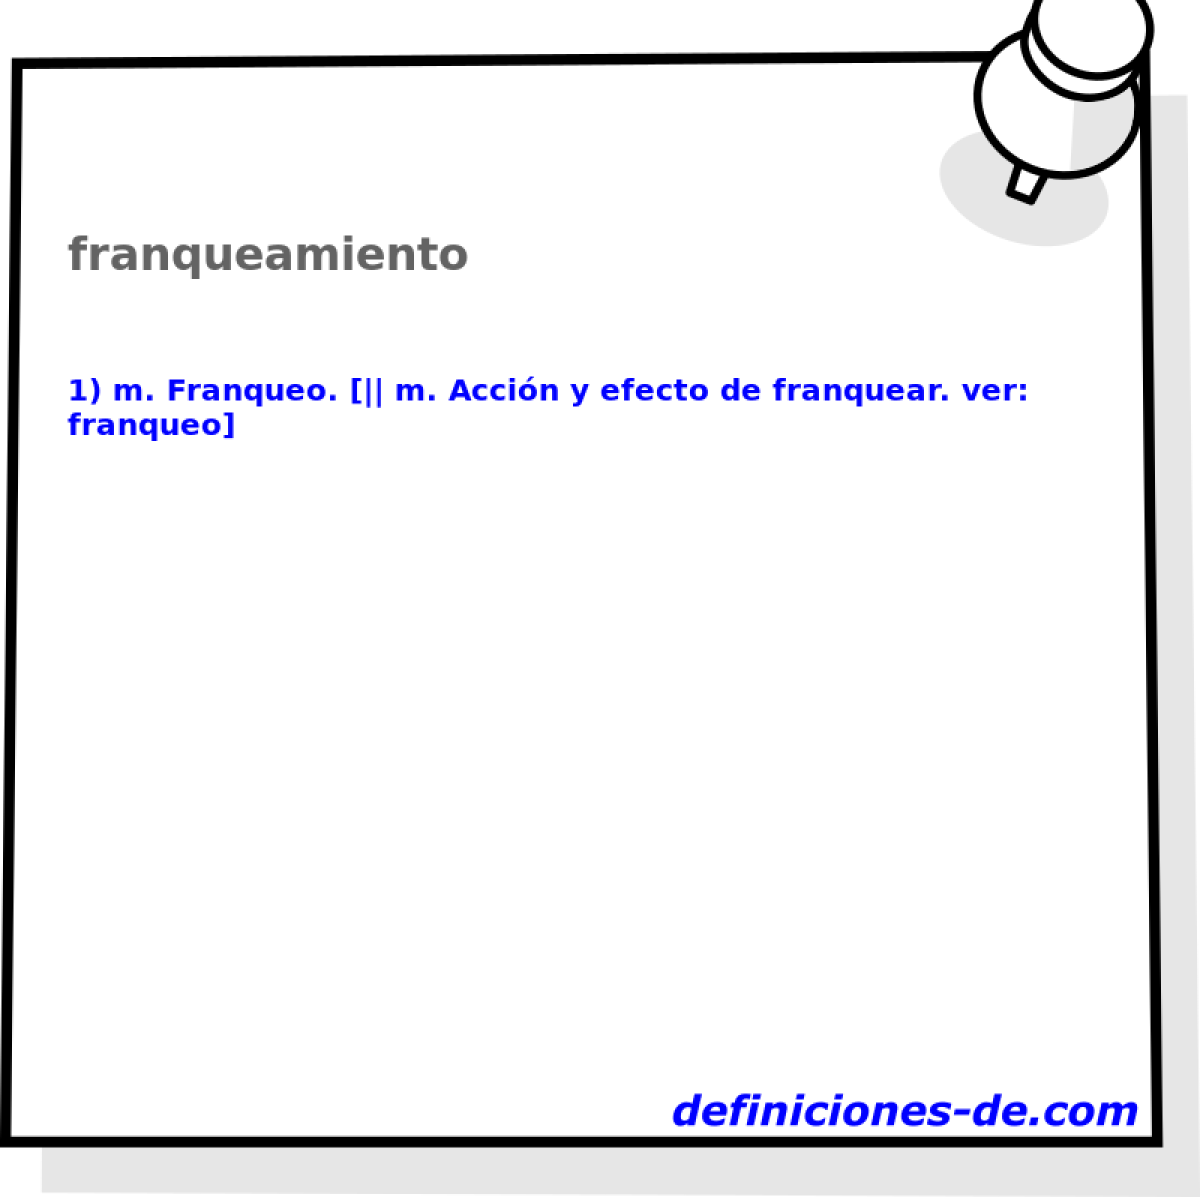 franqueamiento 